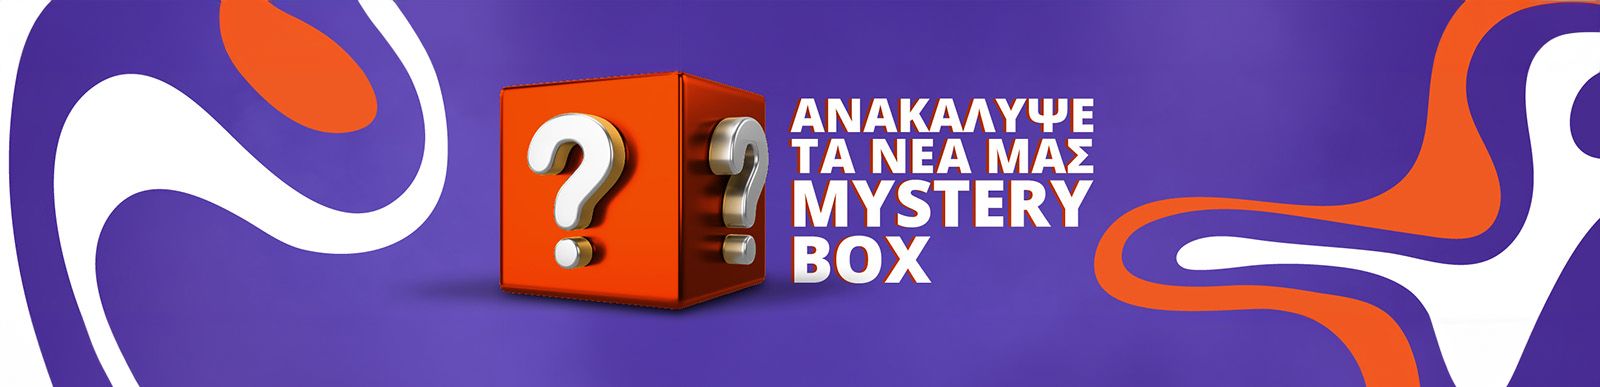 NGT Main Page Grid Banners Mystery Box up